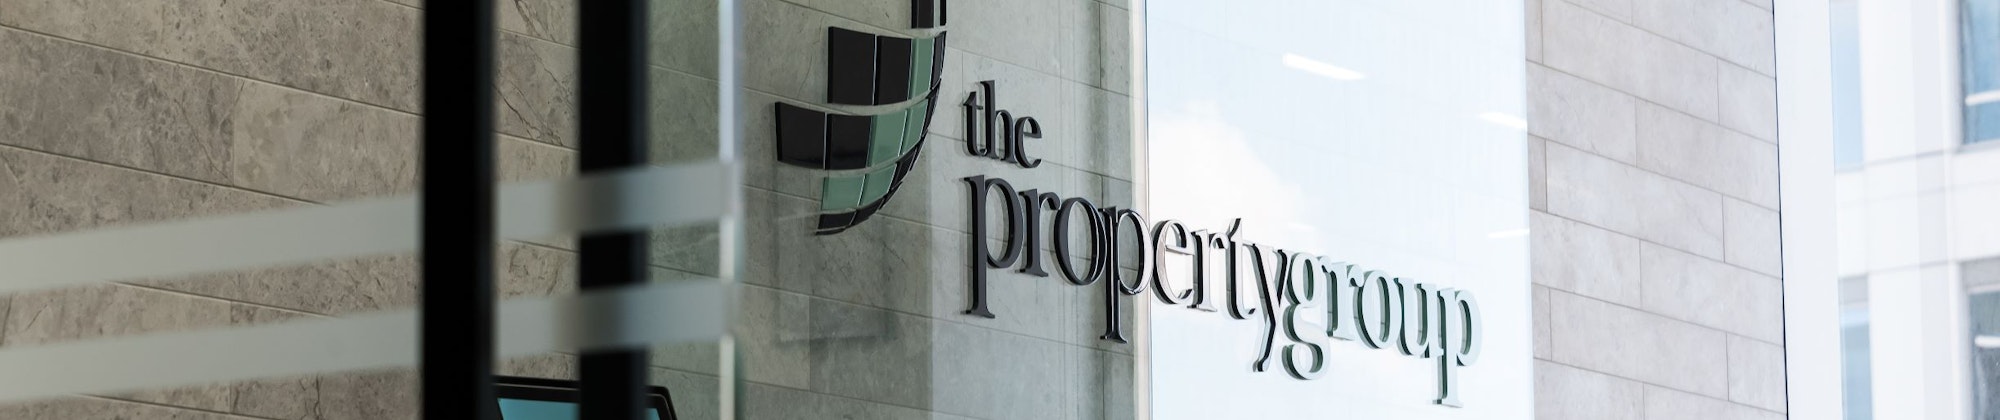 The property group sign